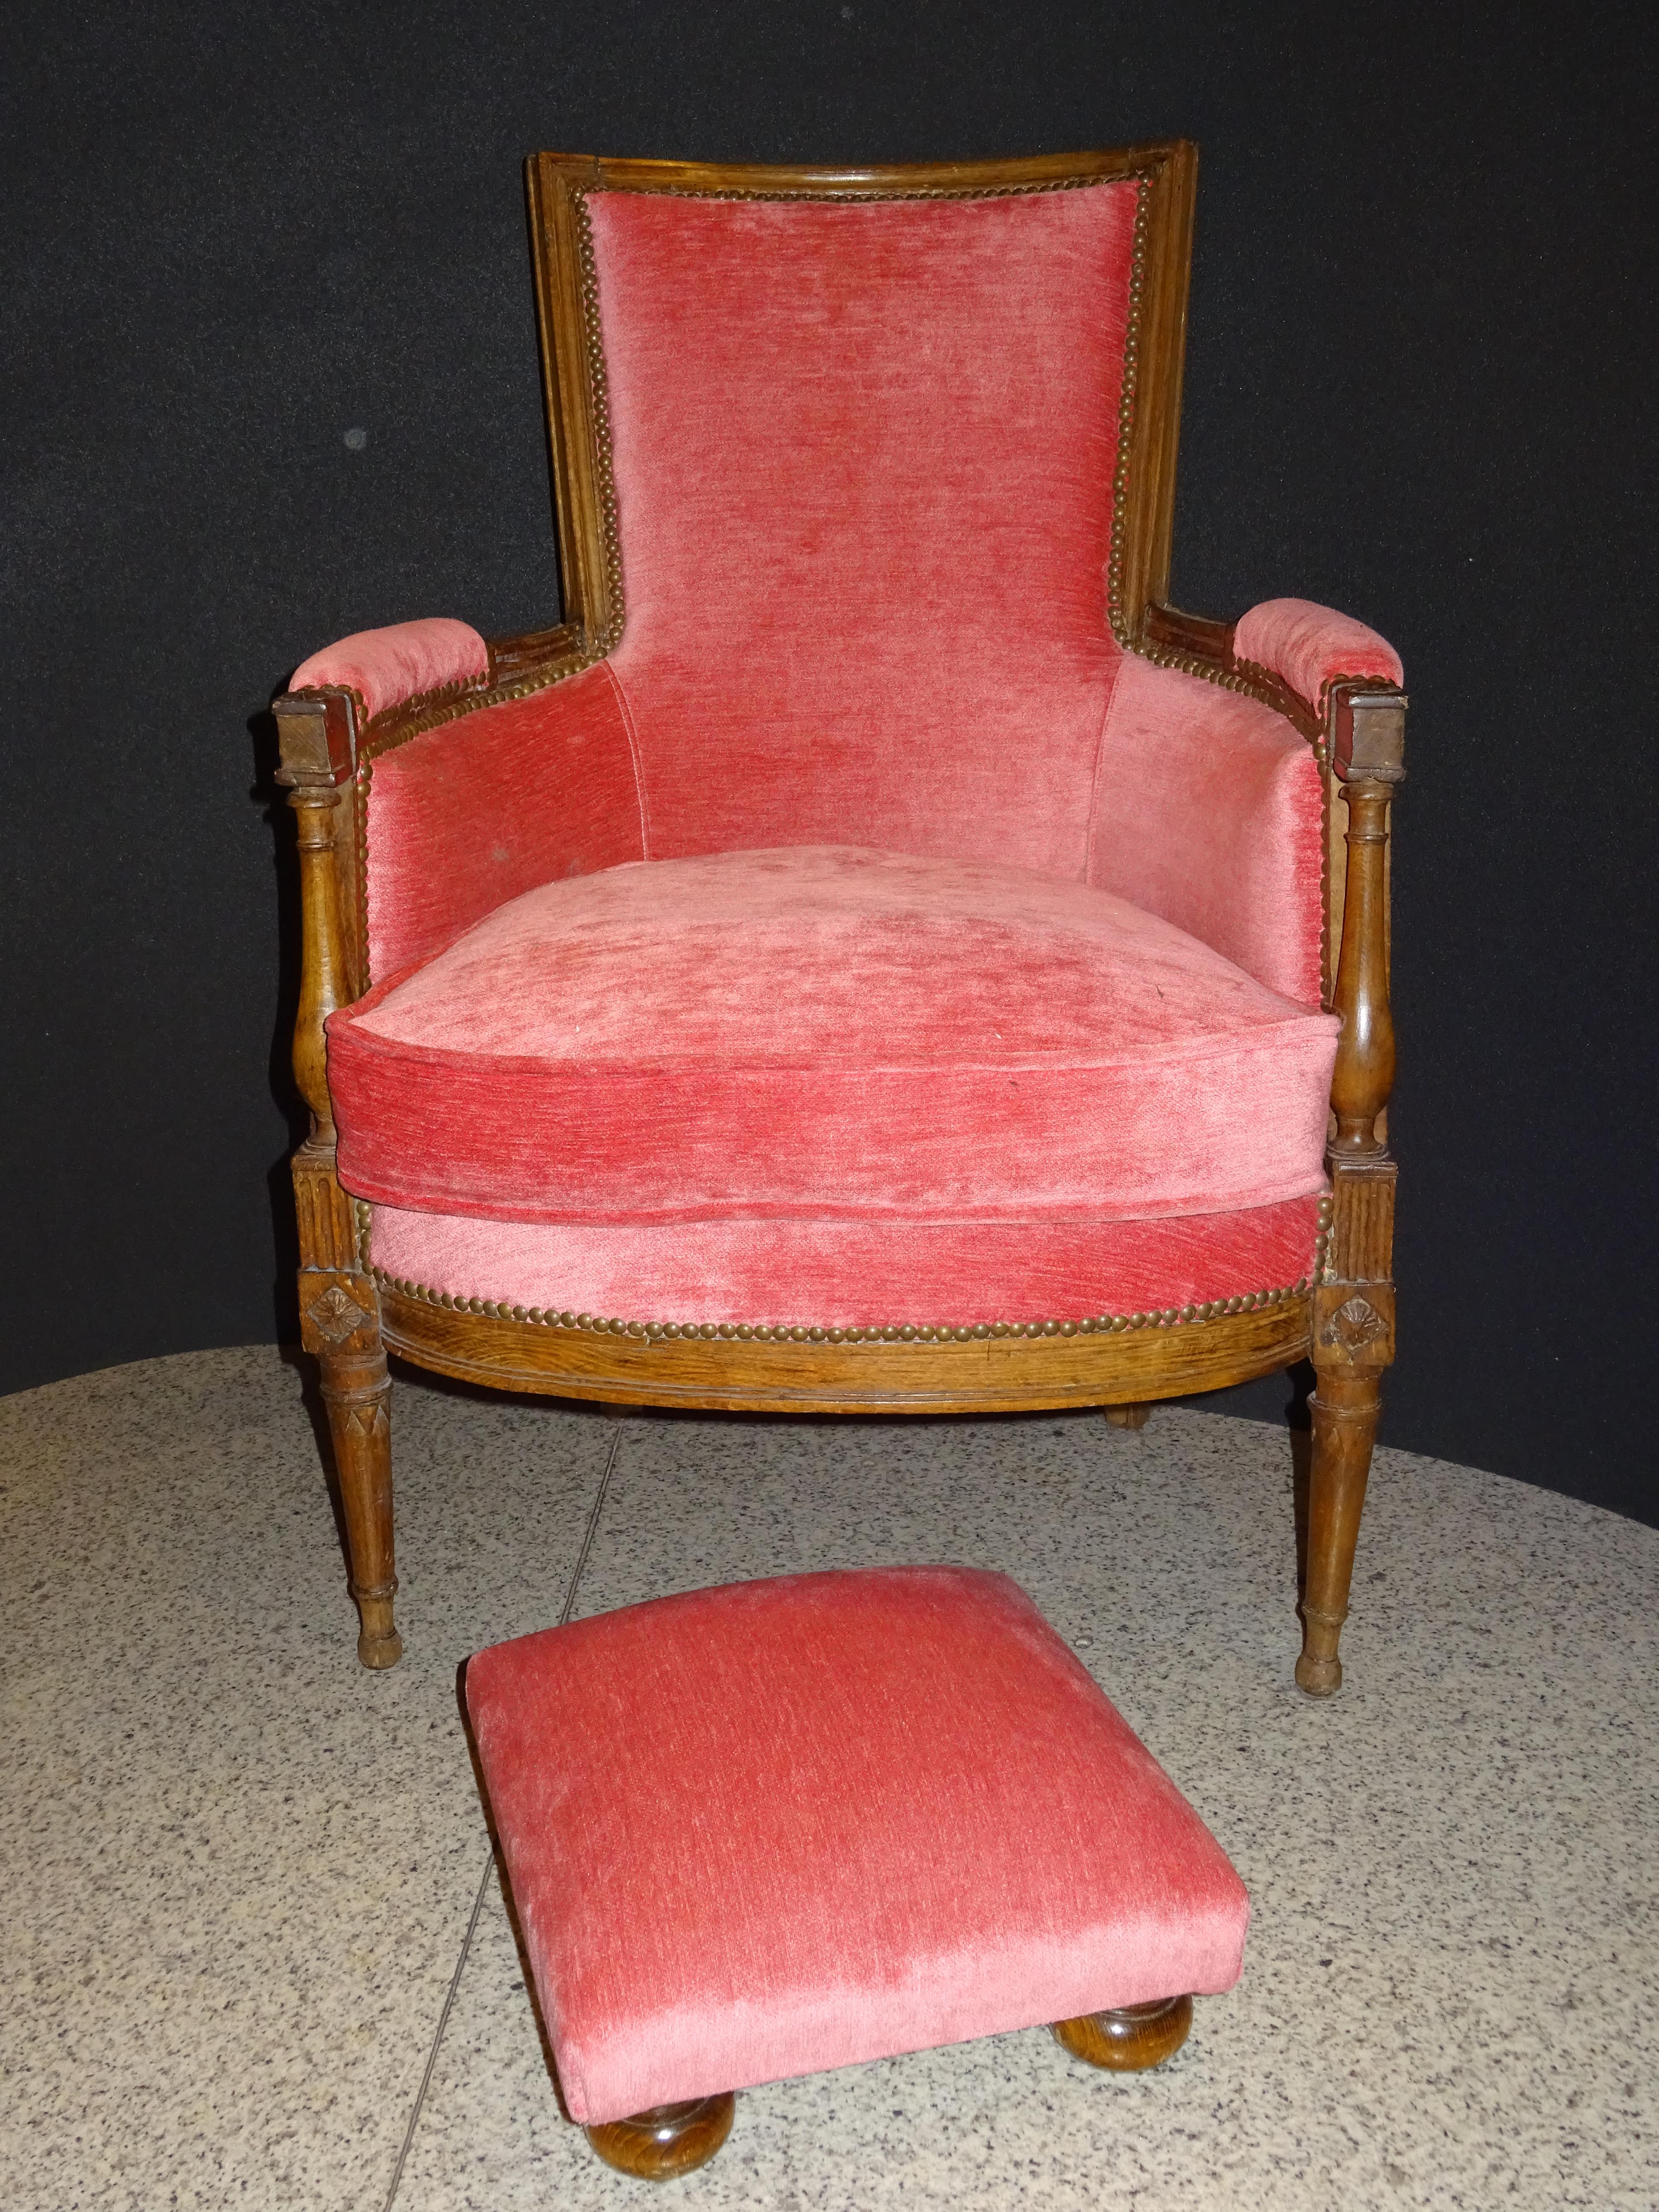 Amazing and very cosy bergere chair in walnut carved wood and upholstered recently in a beautiful pink velvet.
It’s in a perfect condition with age and use, very comfortable and a piece of high class in any environment!!
There are the possibility